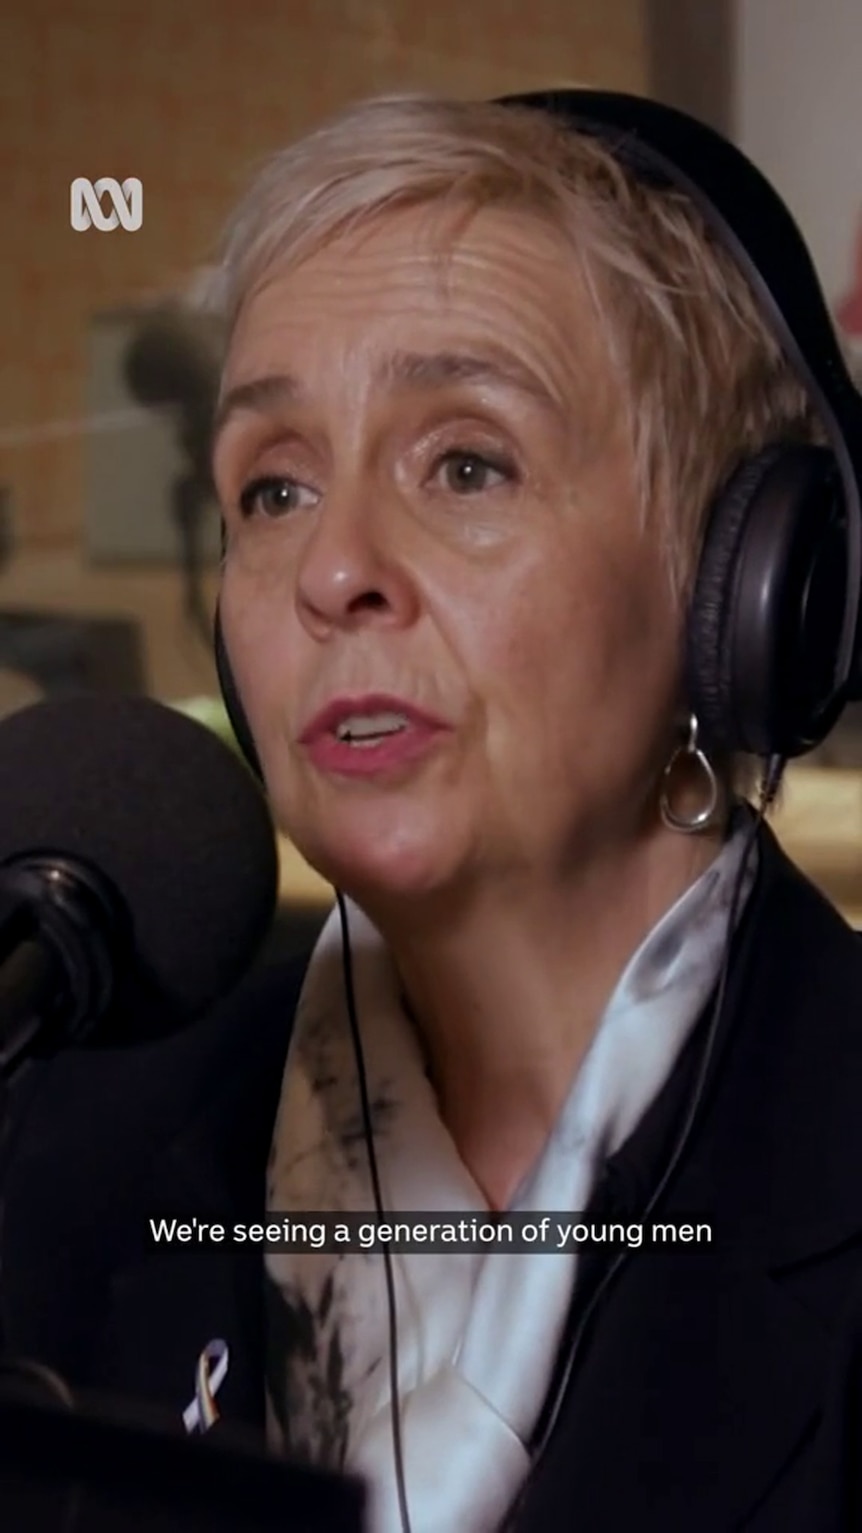 A middle-aged white woman wearing studio headphones with short hair speaks into a microphone